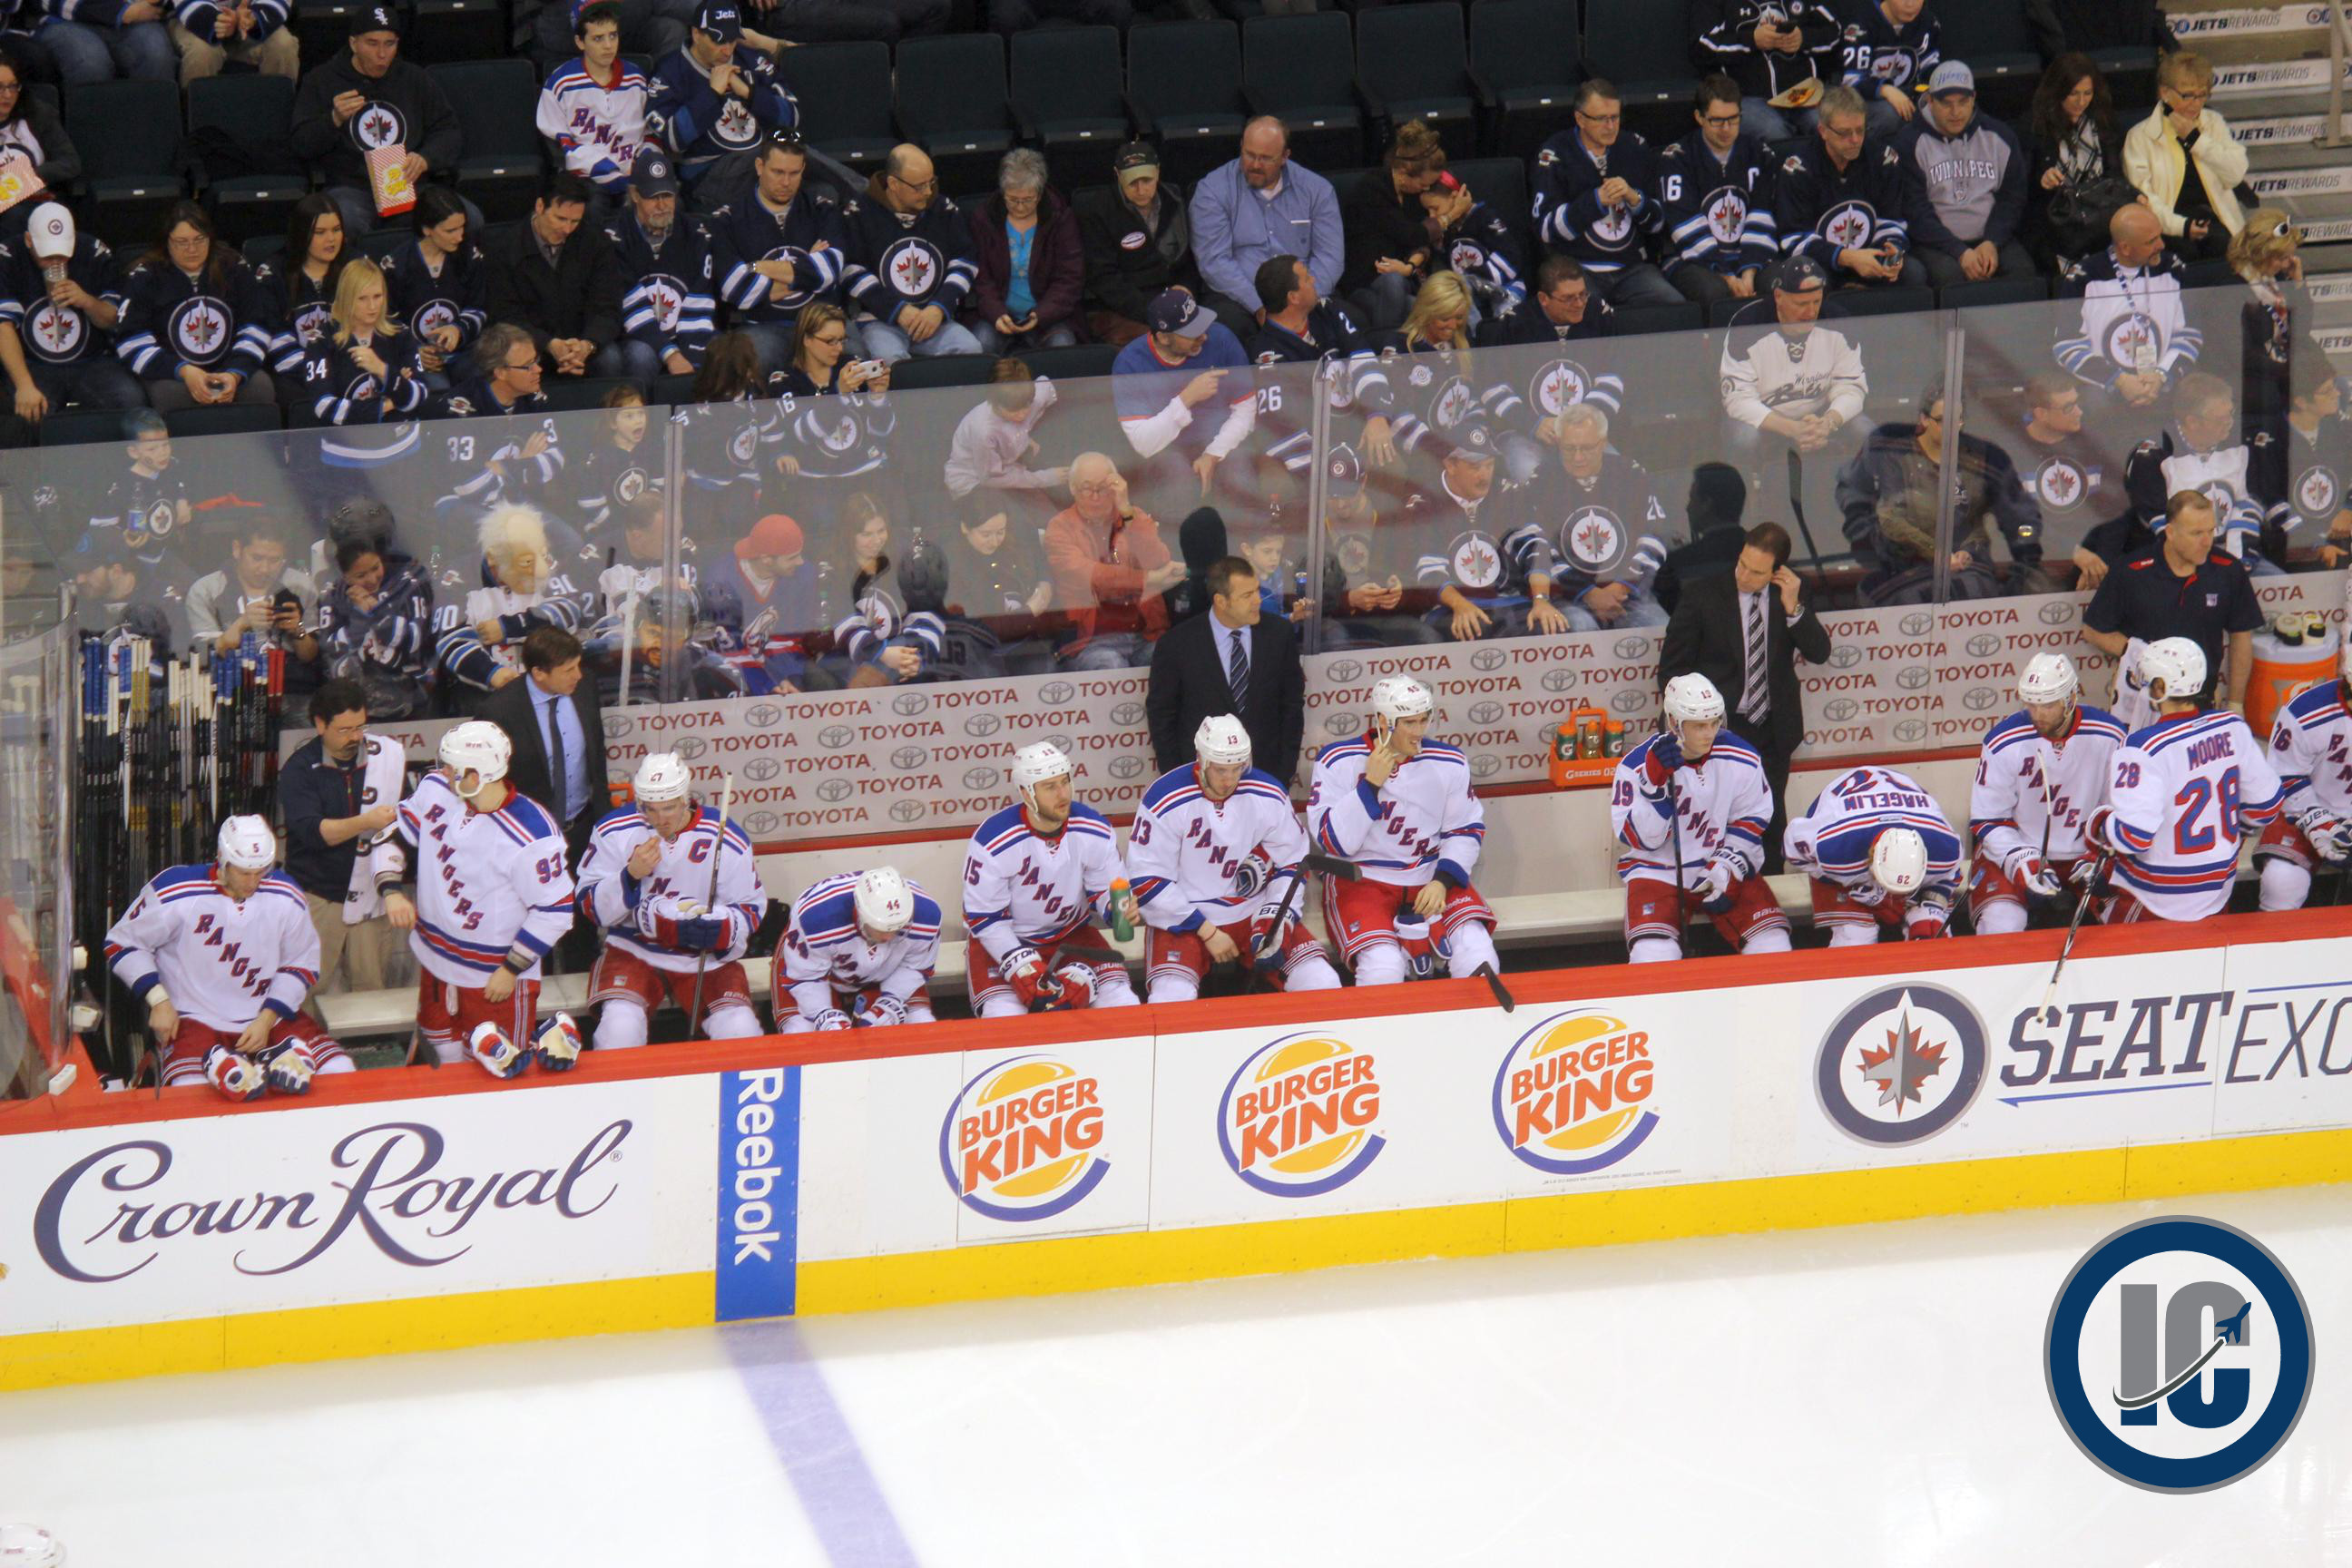 Rangers bench March 31